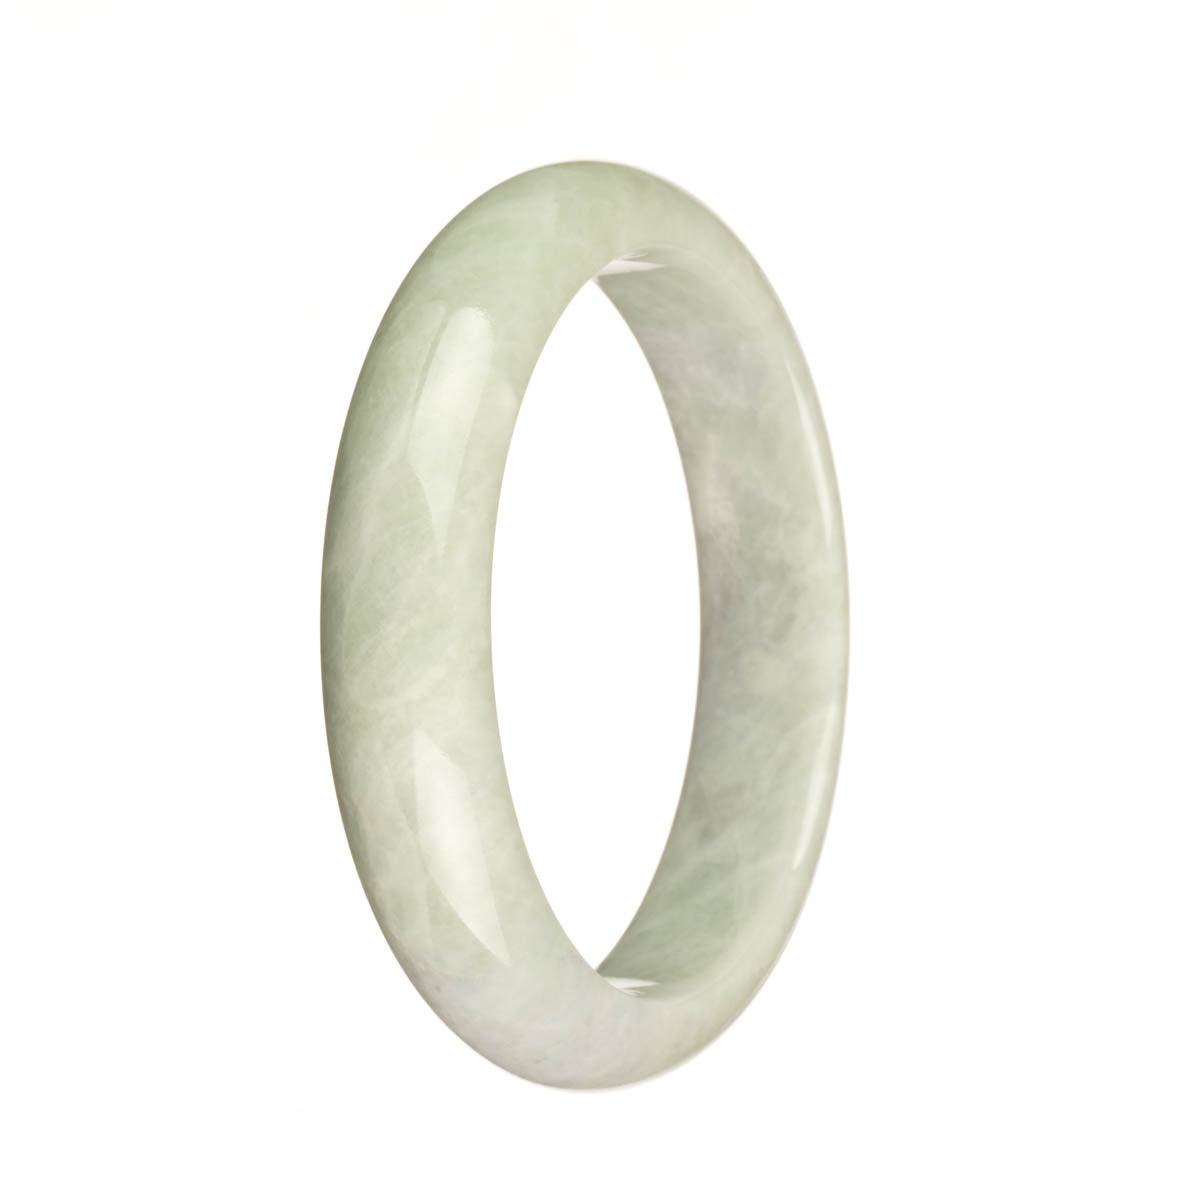 A genuine Grade A Green and Lavender Traditional Jade Bangle with a 59mm Half Moon shape, available at MAYS.